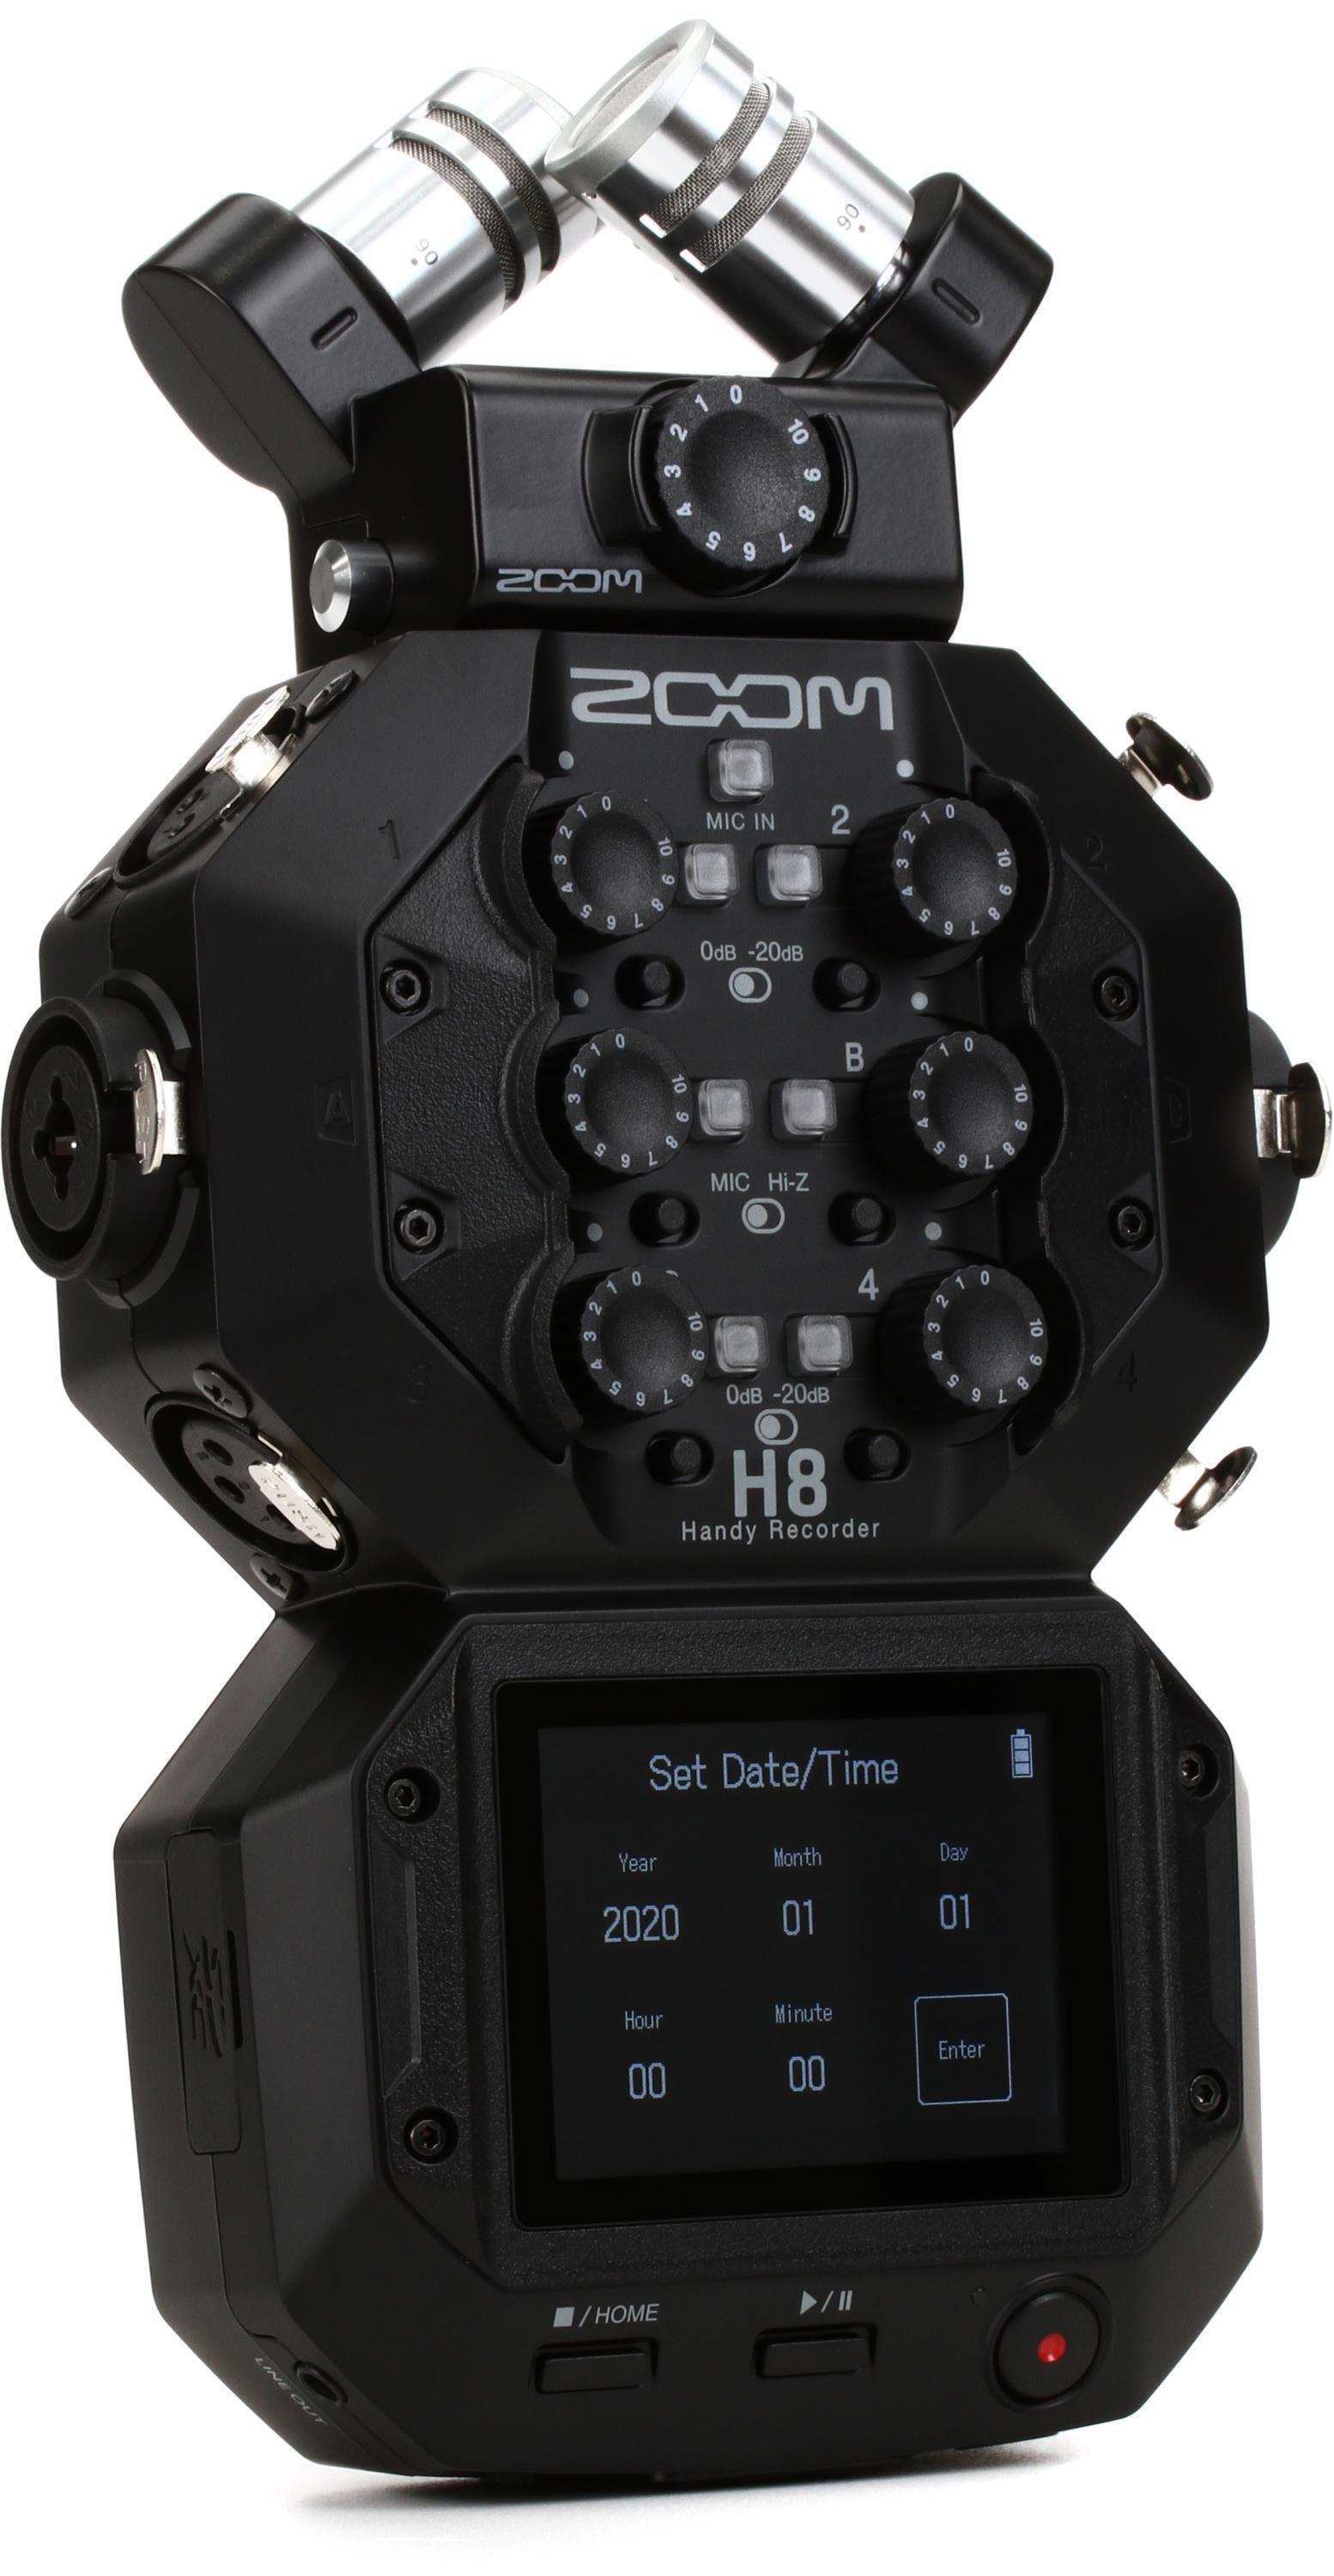 8-input　Recorder　Zoom　Sweetwater　H8　Handy